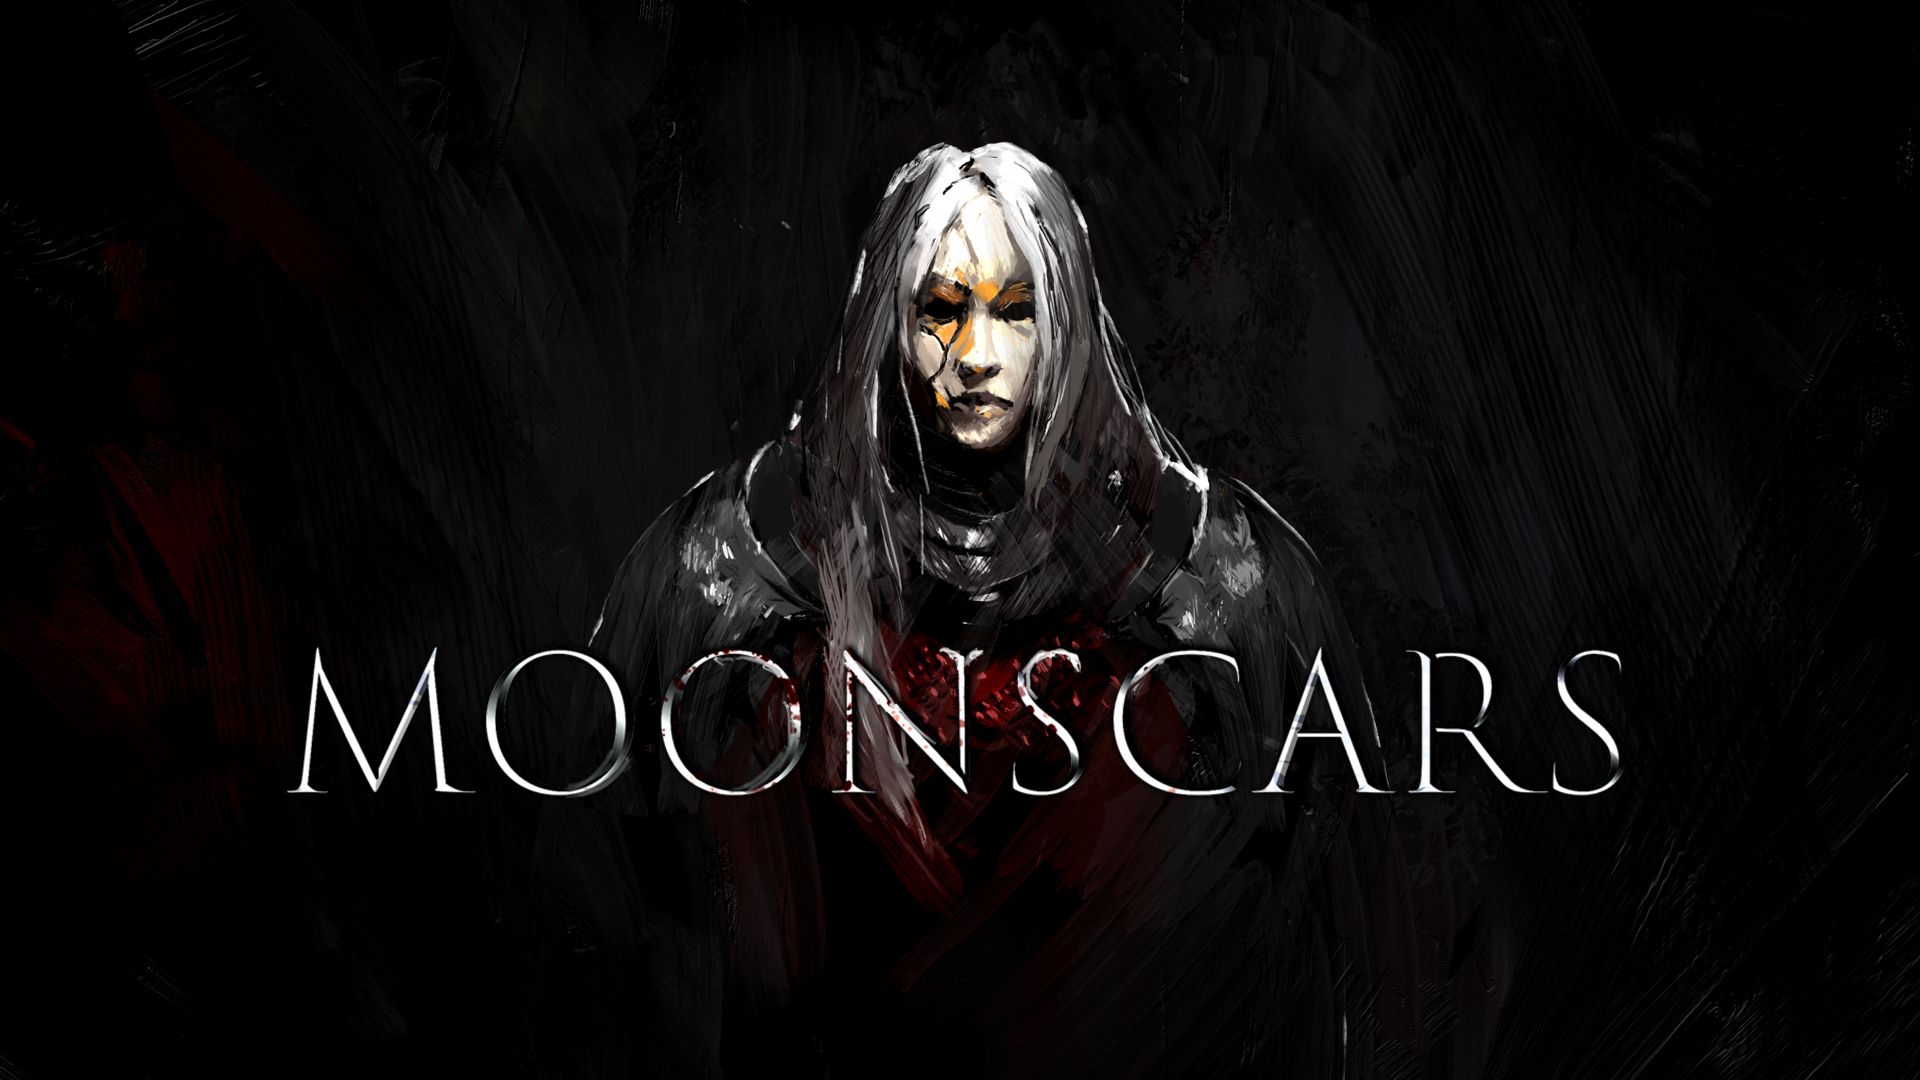 It's Time to Meet Your Maker! Moonscars is Now Available - Xbox Wire